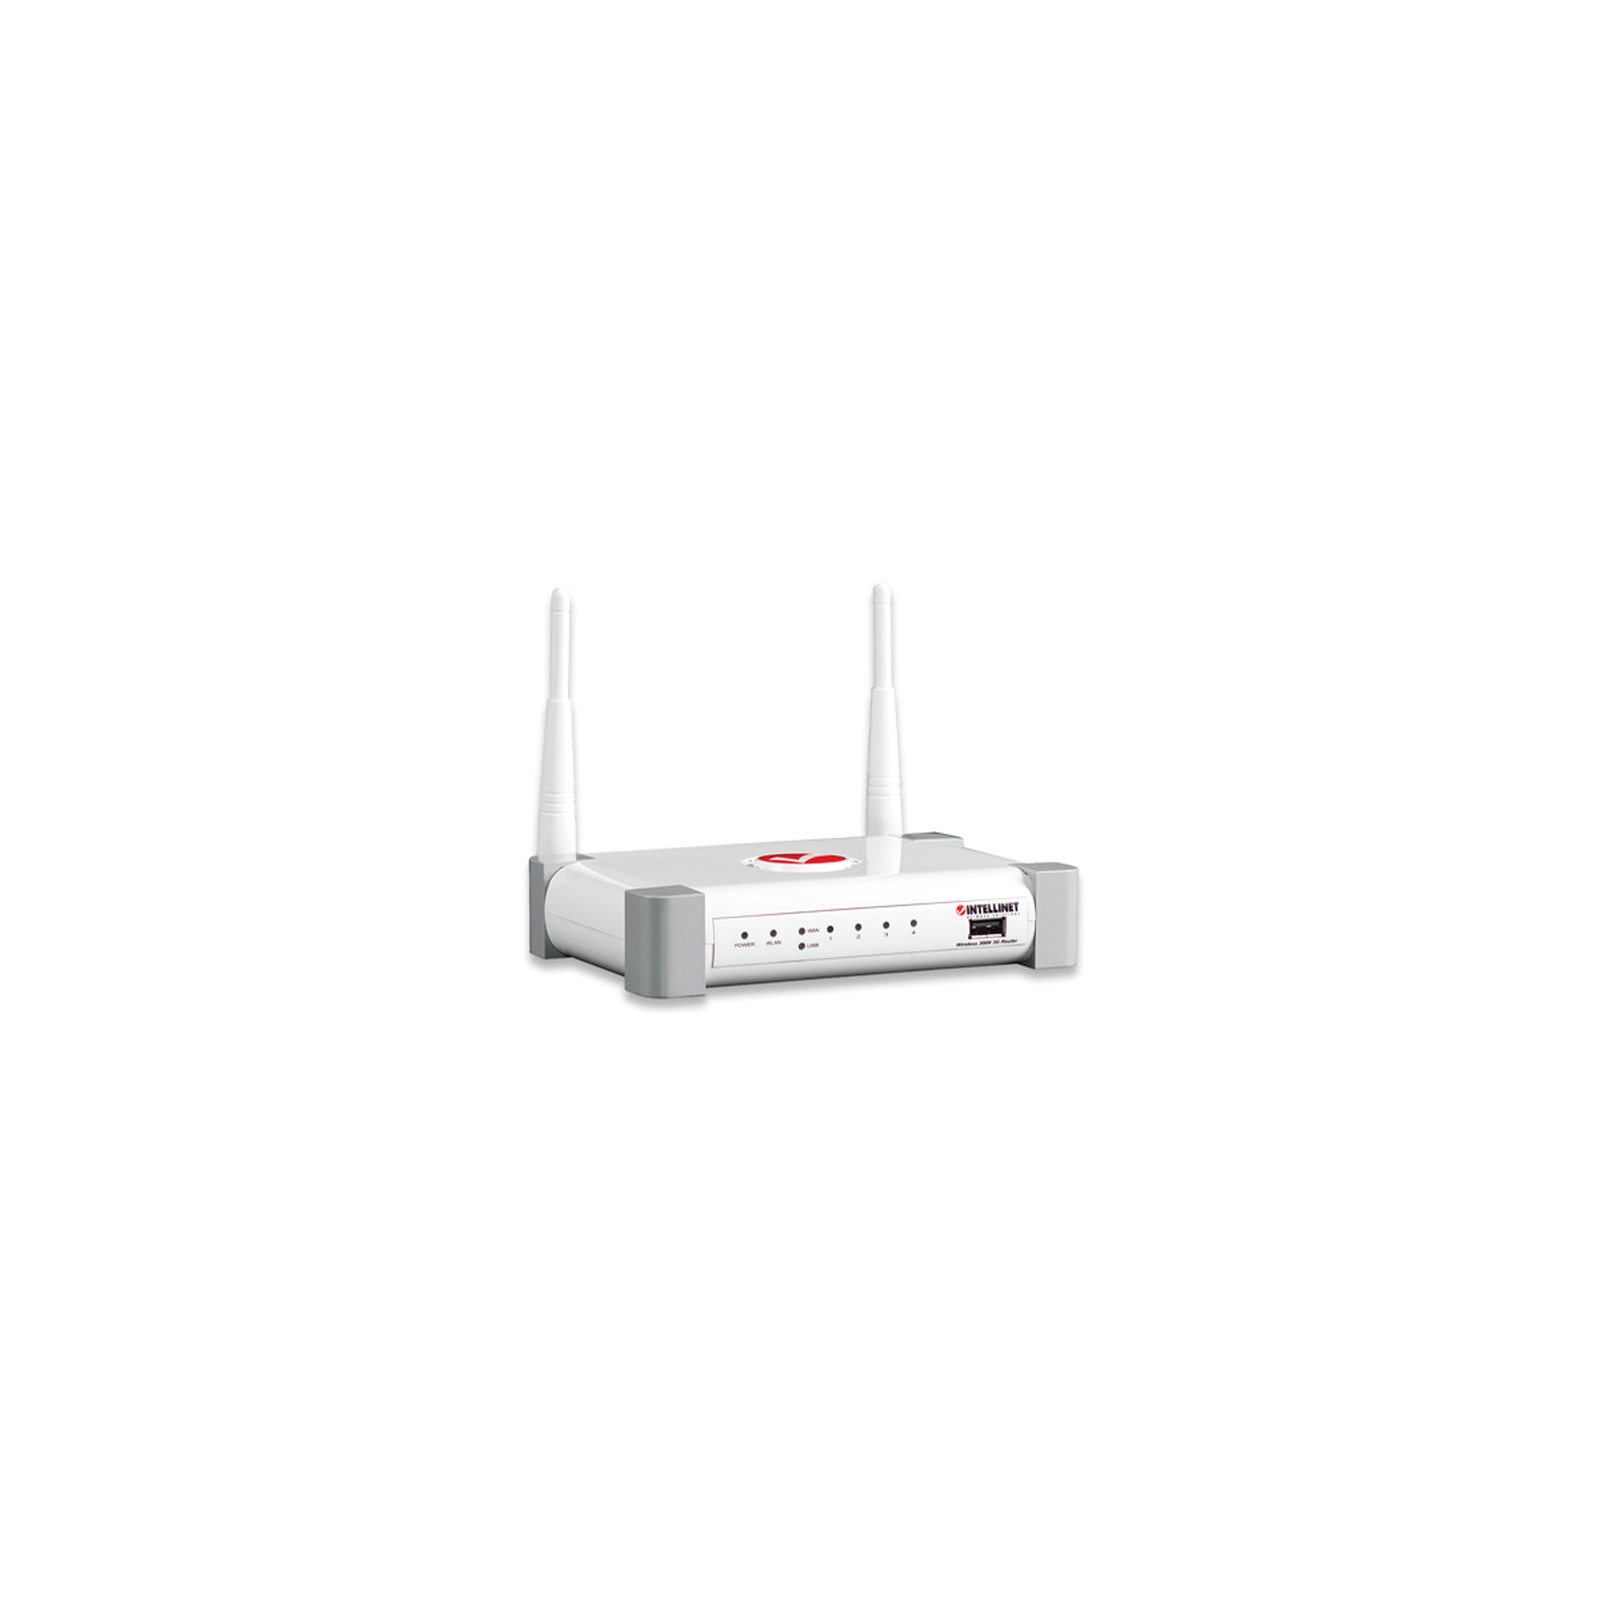 Маршрутизатор Intellinet 3G 4-Port Router MIMO 2T2R изображение 4